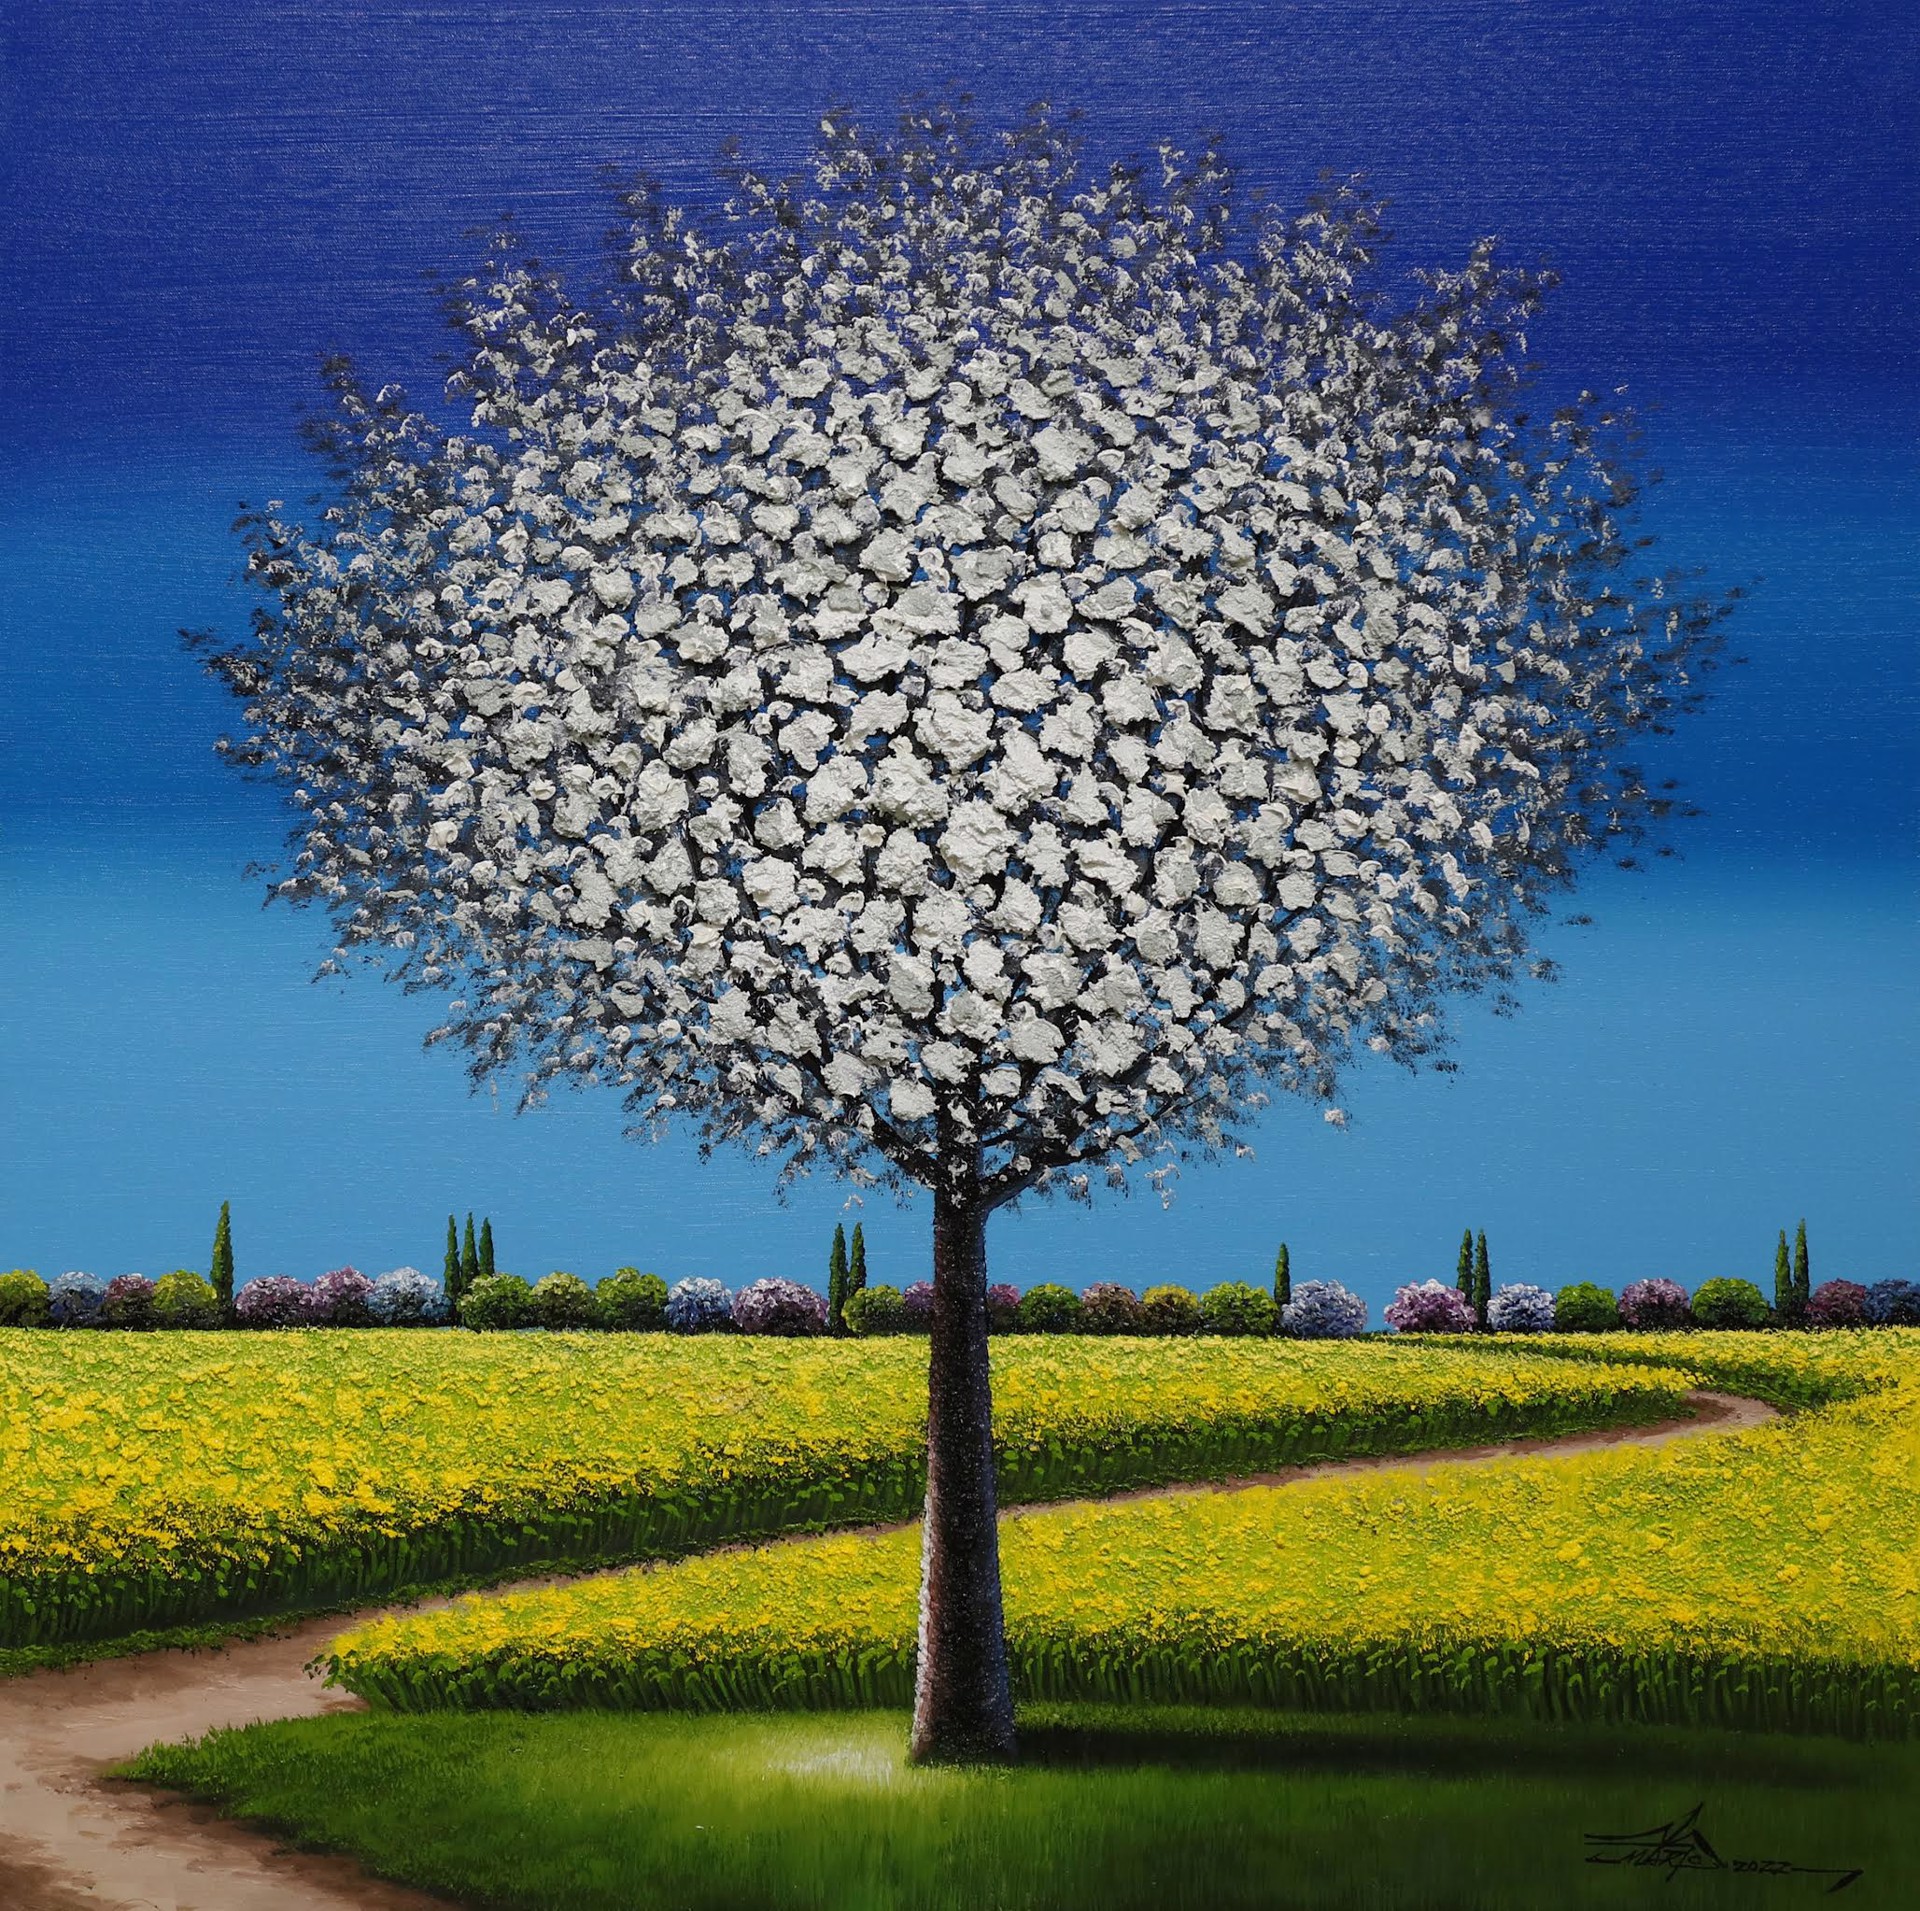 Lead To You by painter artist Mario Jung features a thickly textured white leaved tree in front of a serene country side